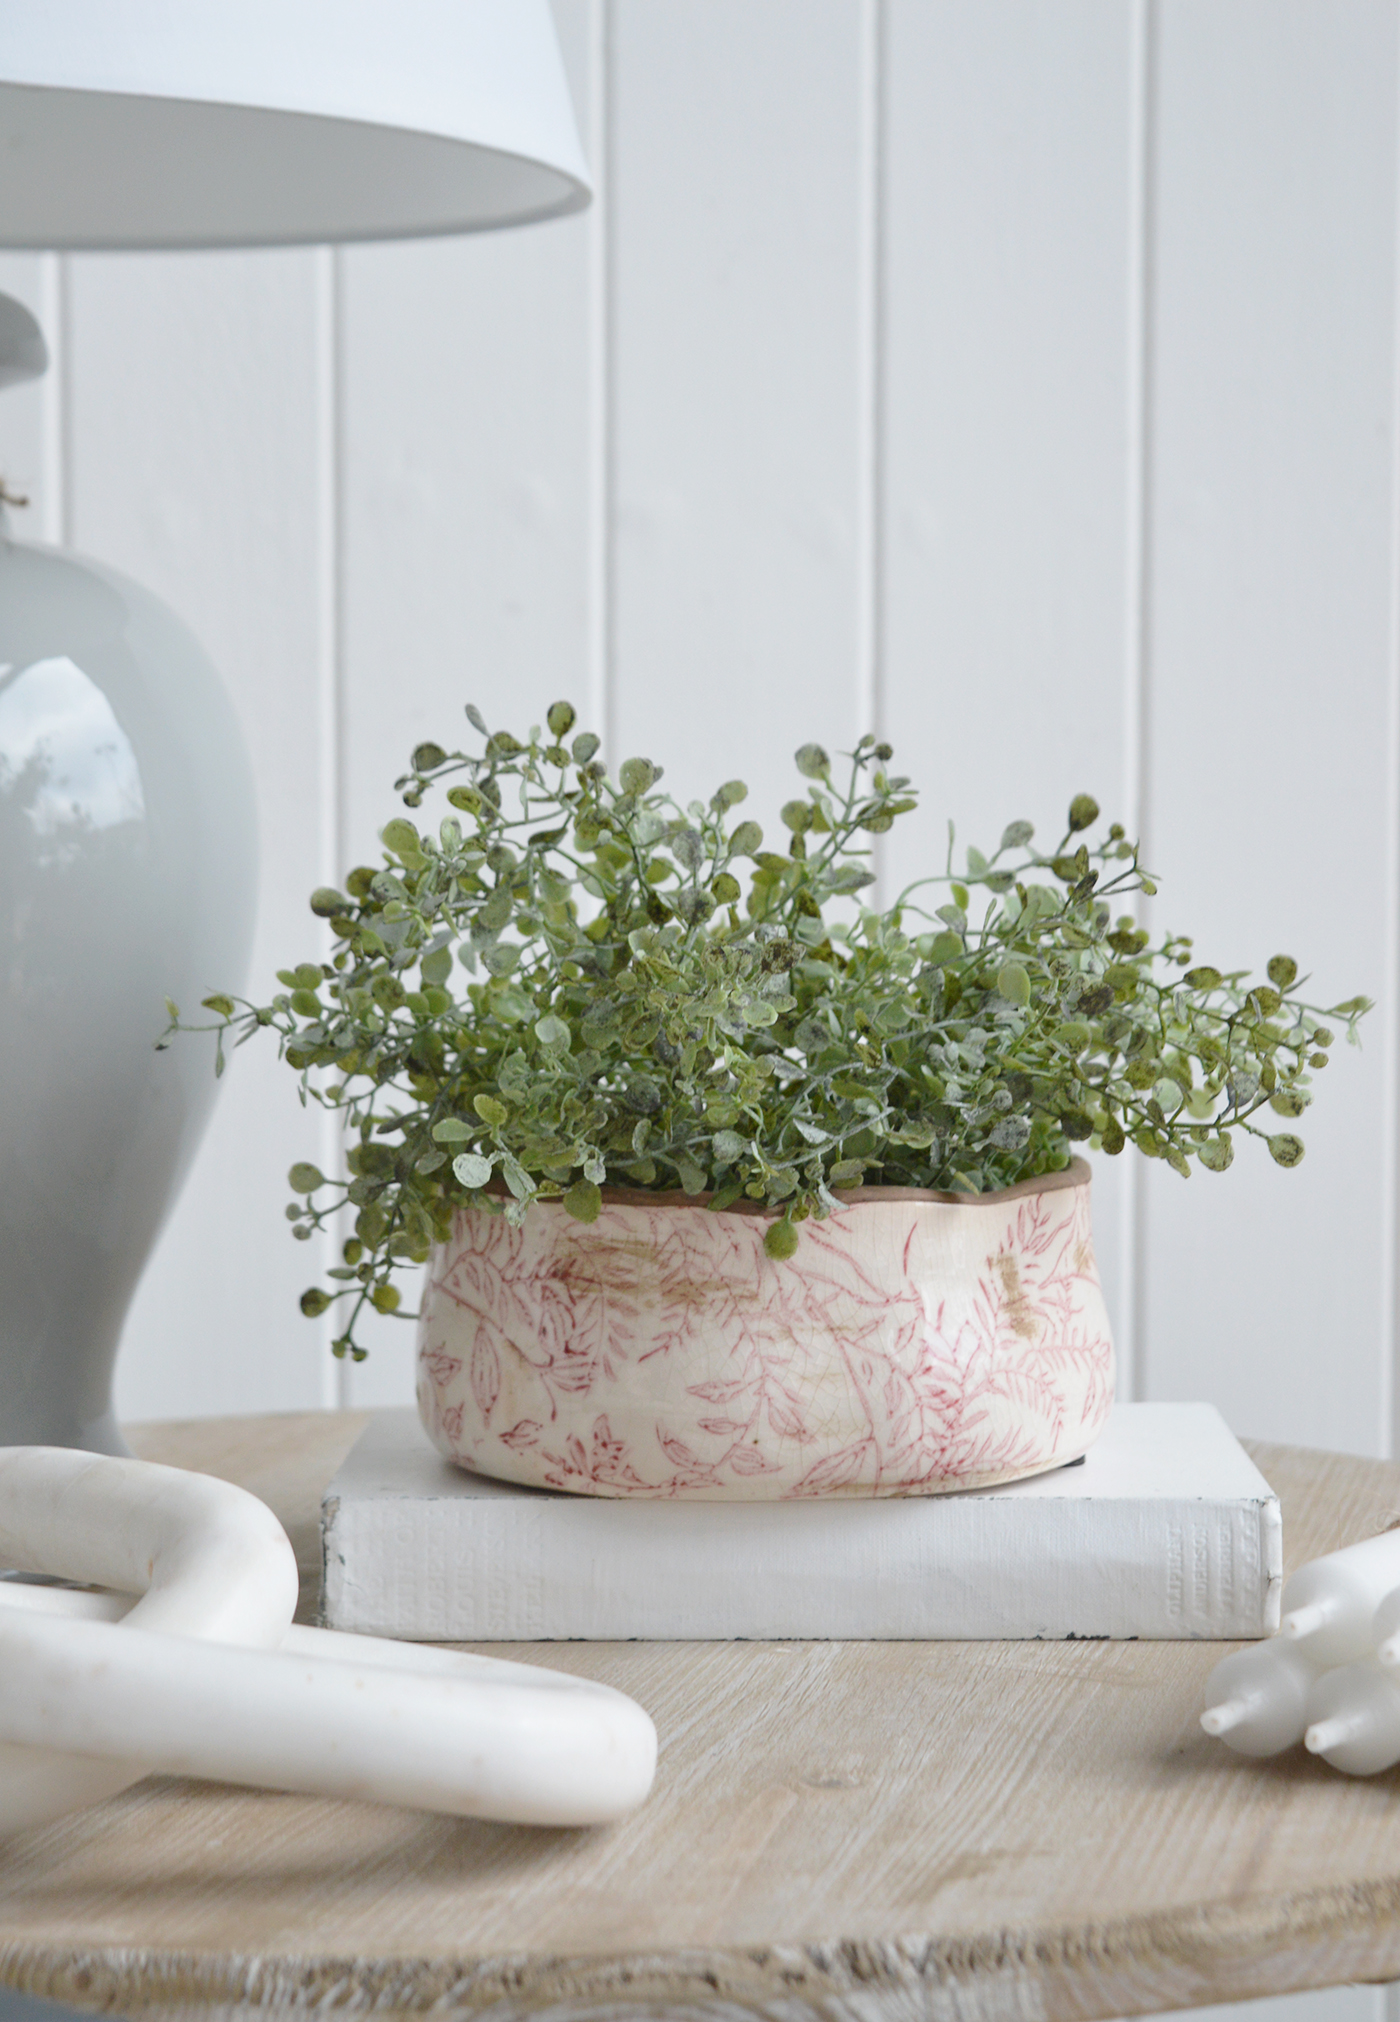 Tolland ceramic plant pot for New England interiors to complement our range of furniture